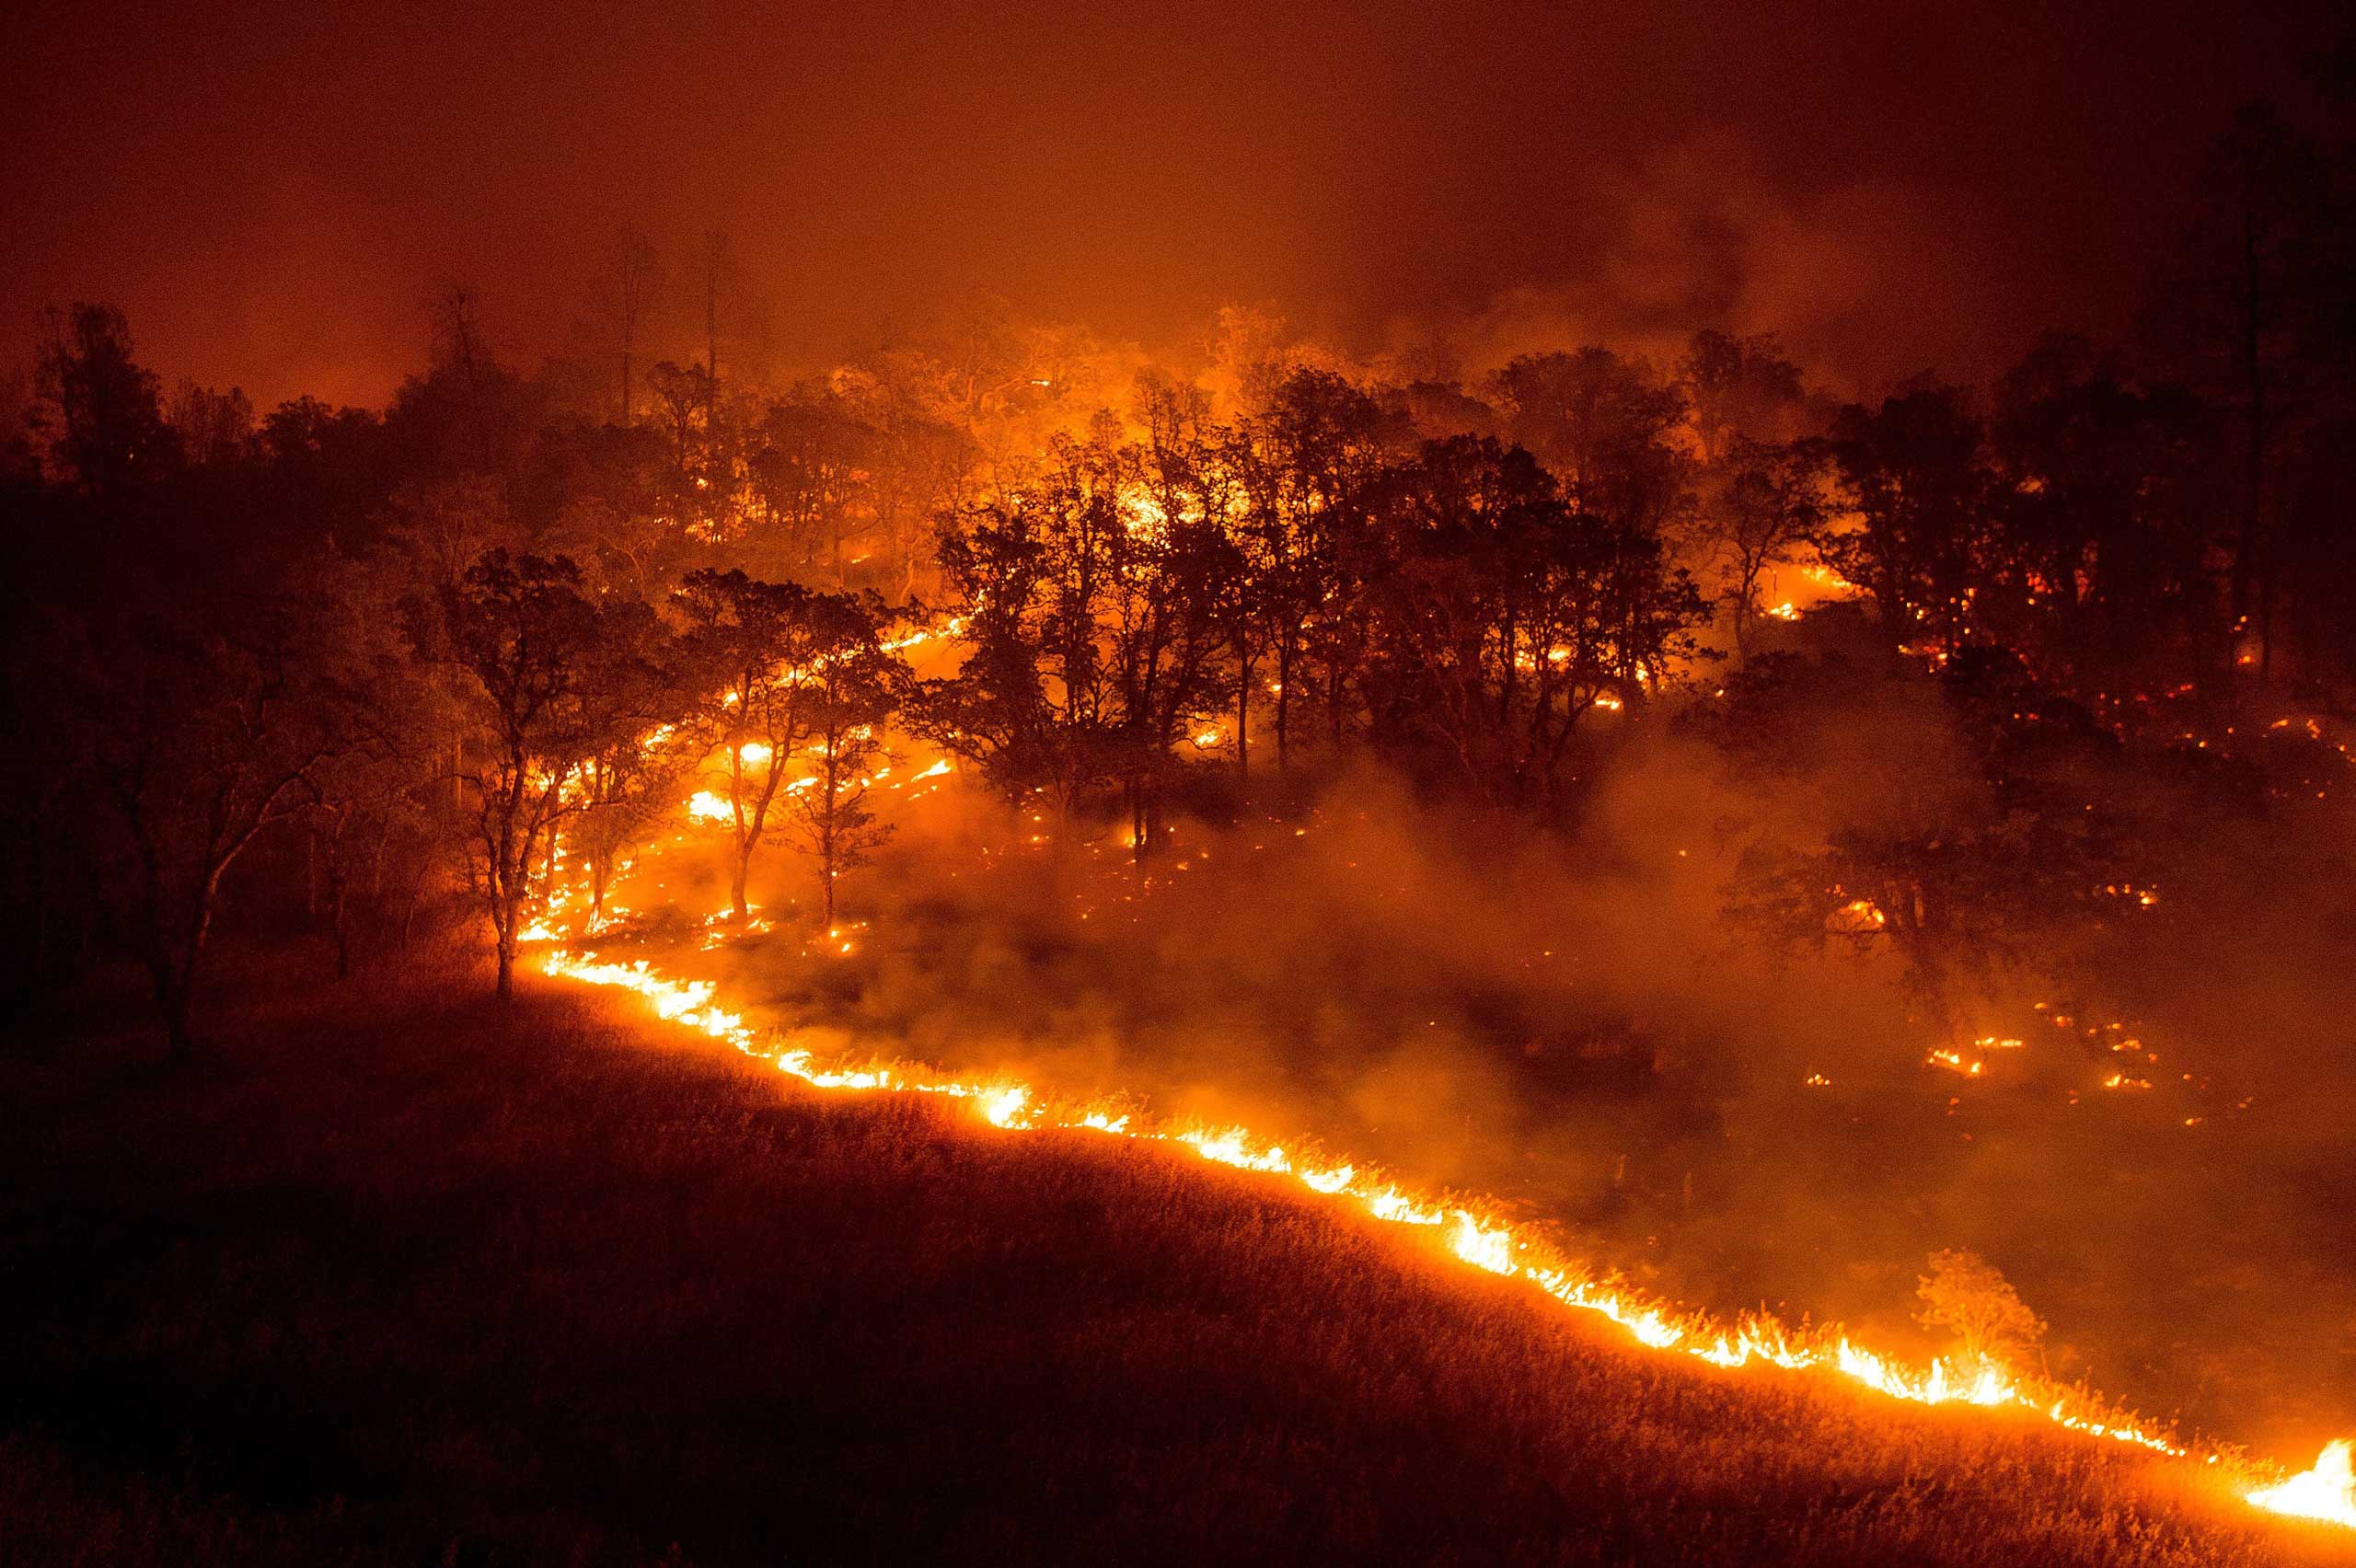 The Rocky fire spreads down a hillside near Clearlake, Calif. on Aug. 1, 2015.